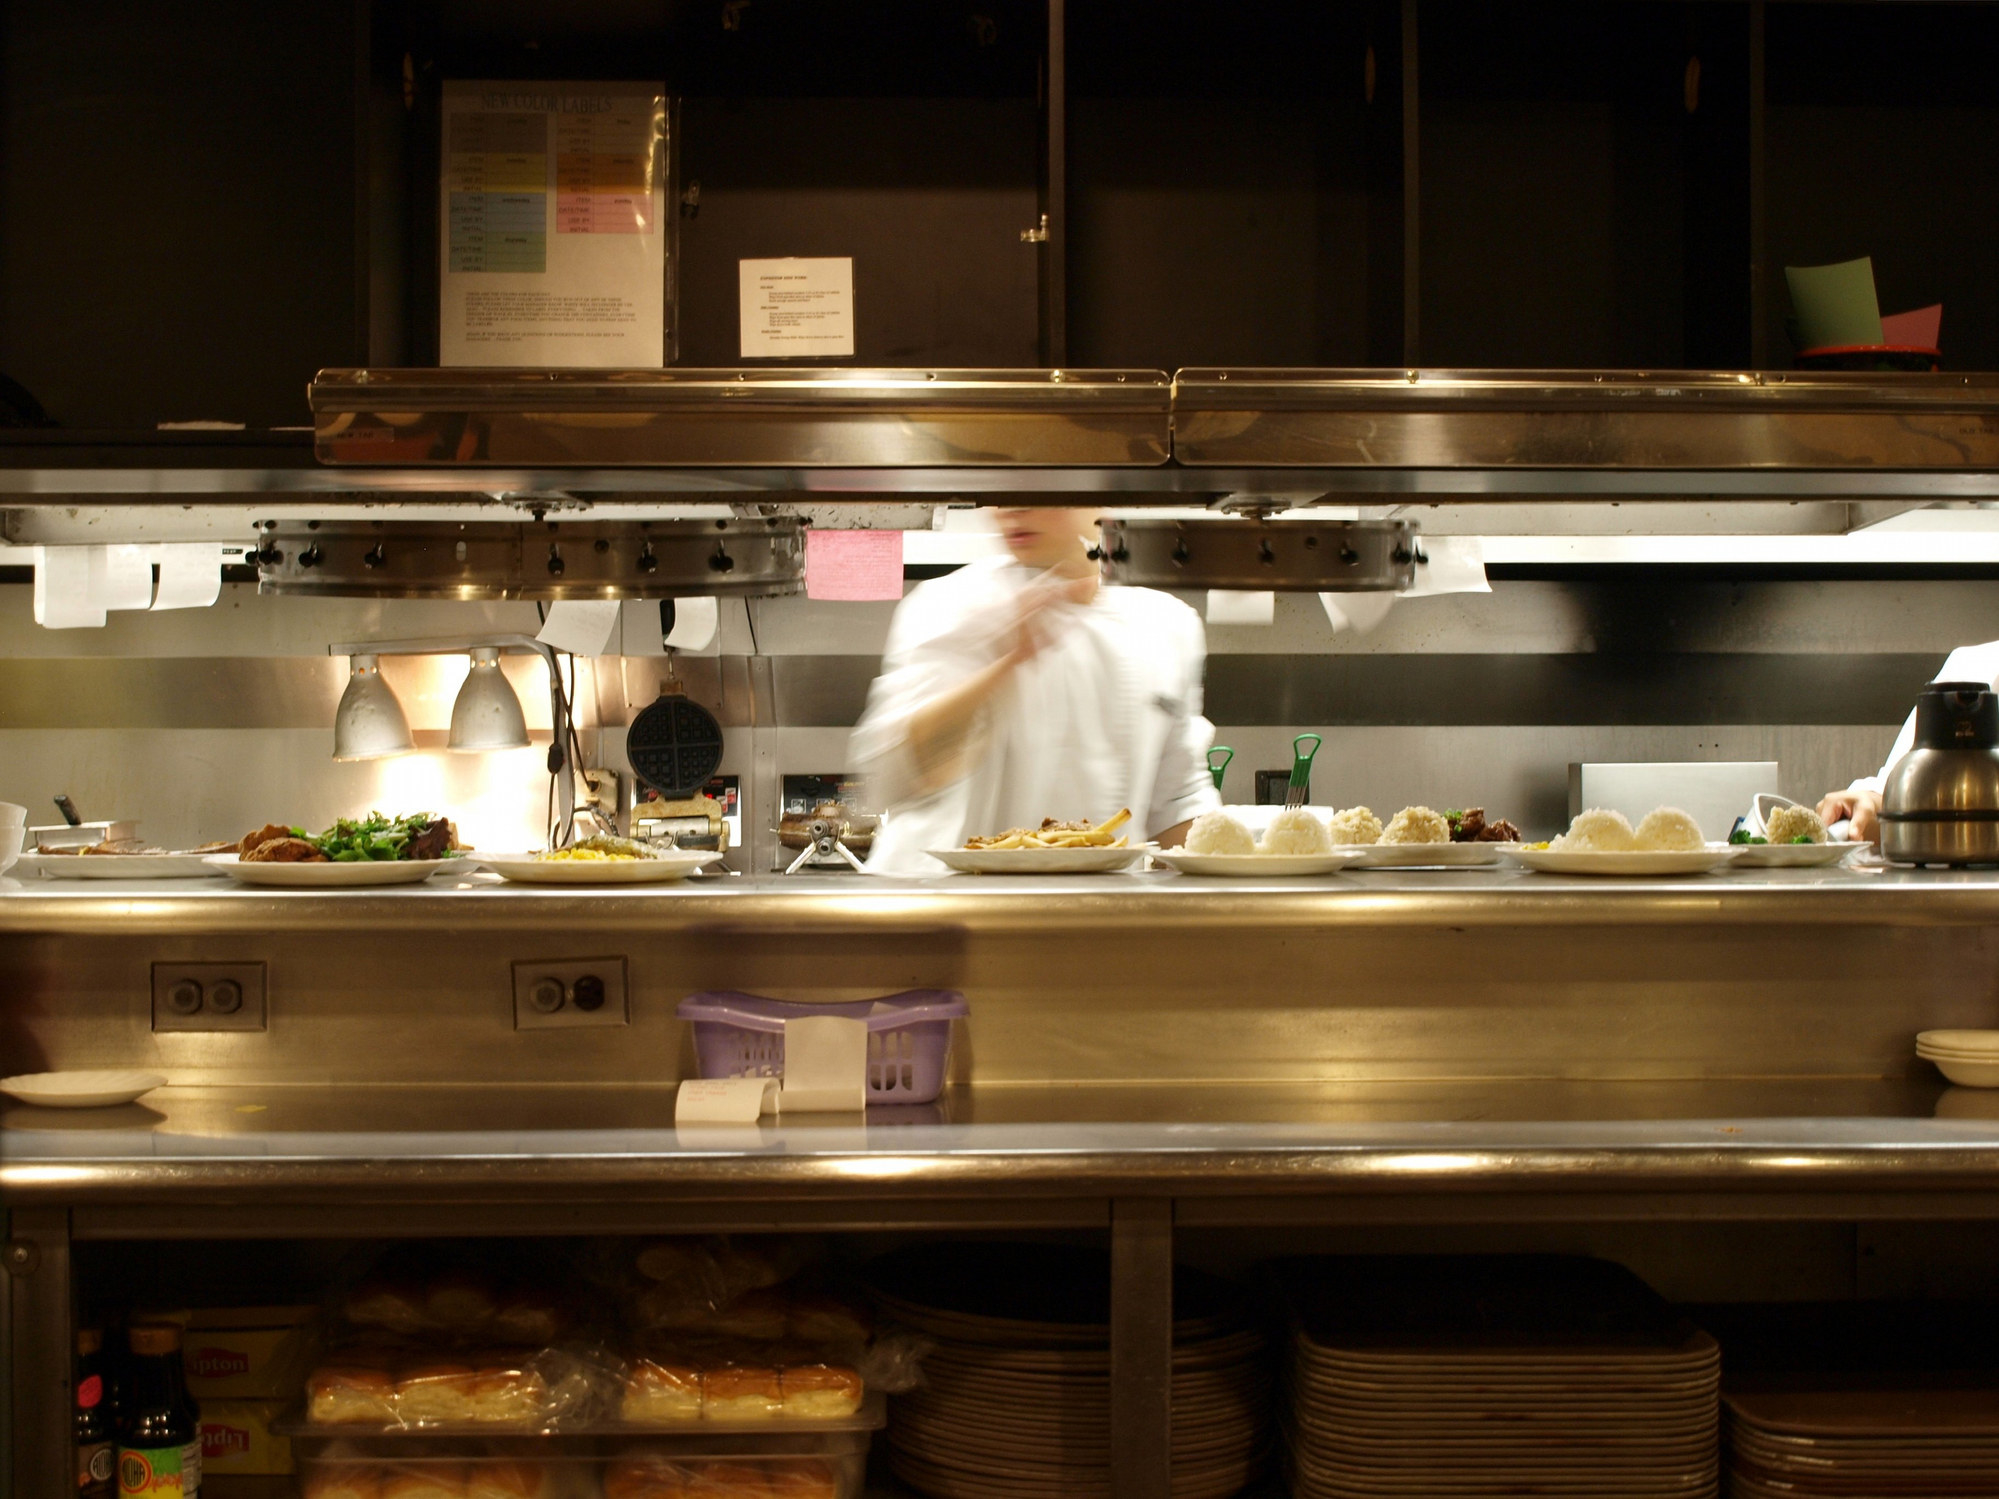 A line cook in a restaurant